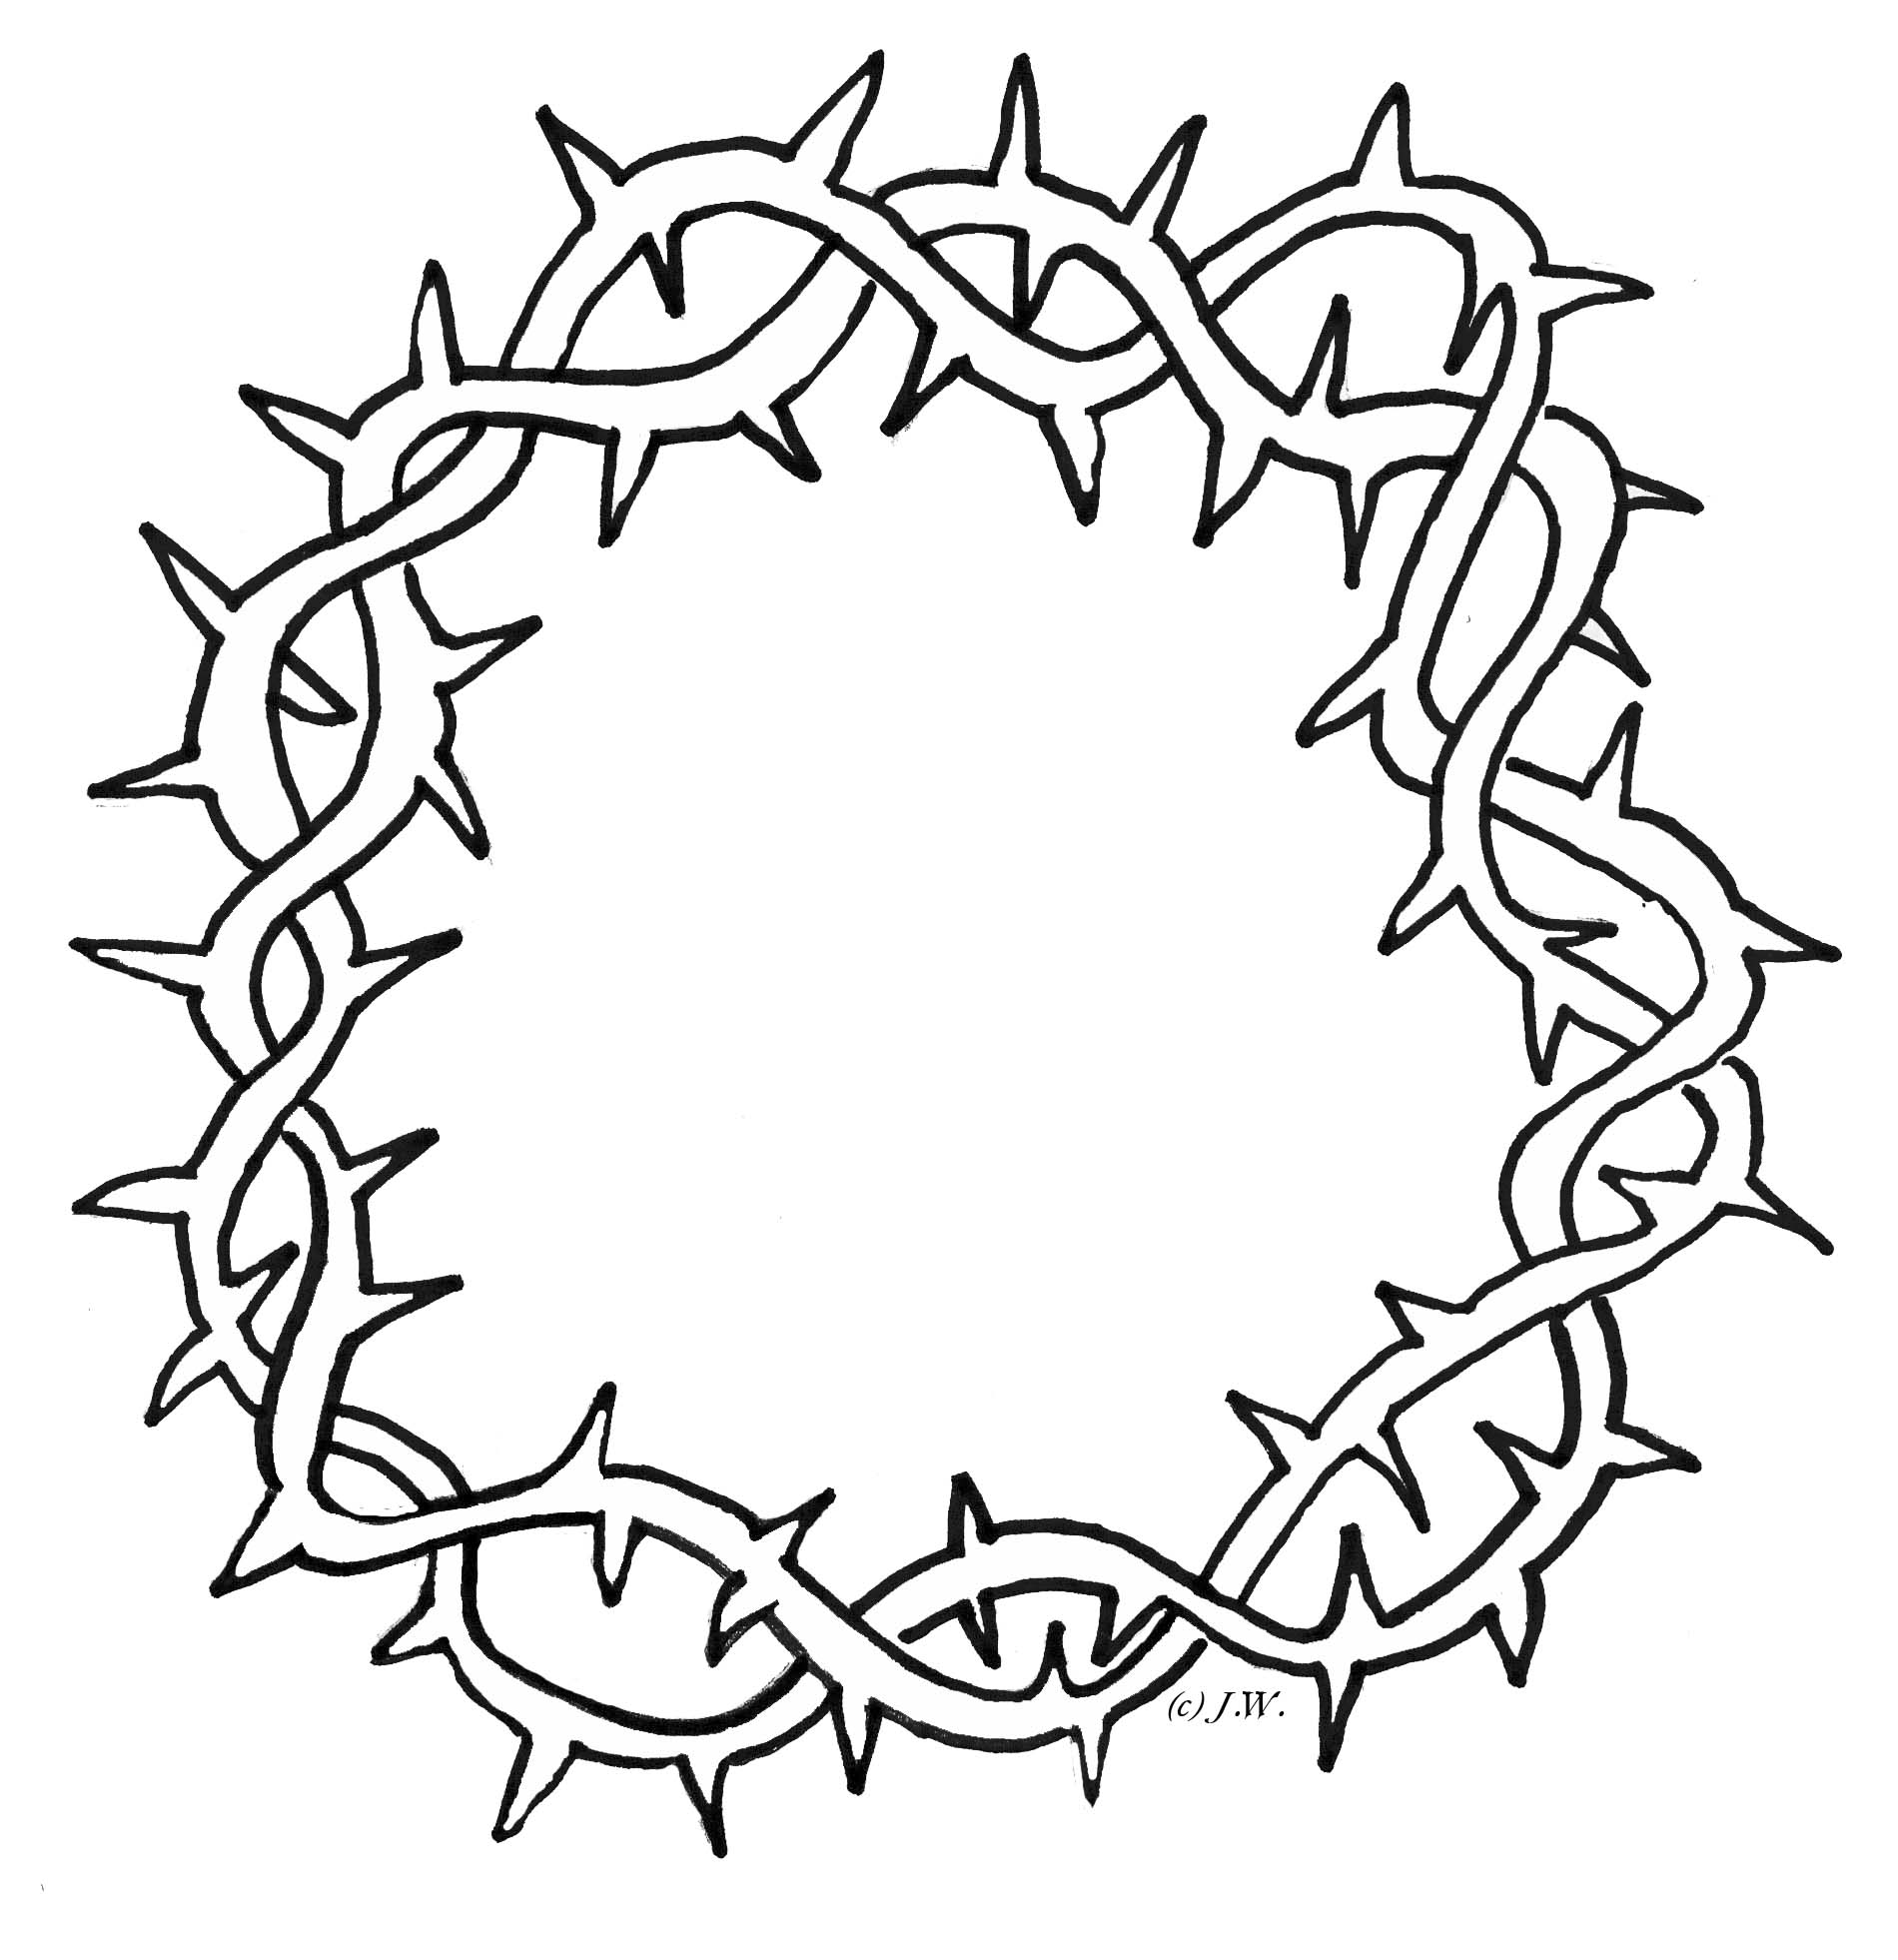 religious clip art crown of thorns - photo #35